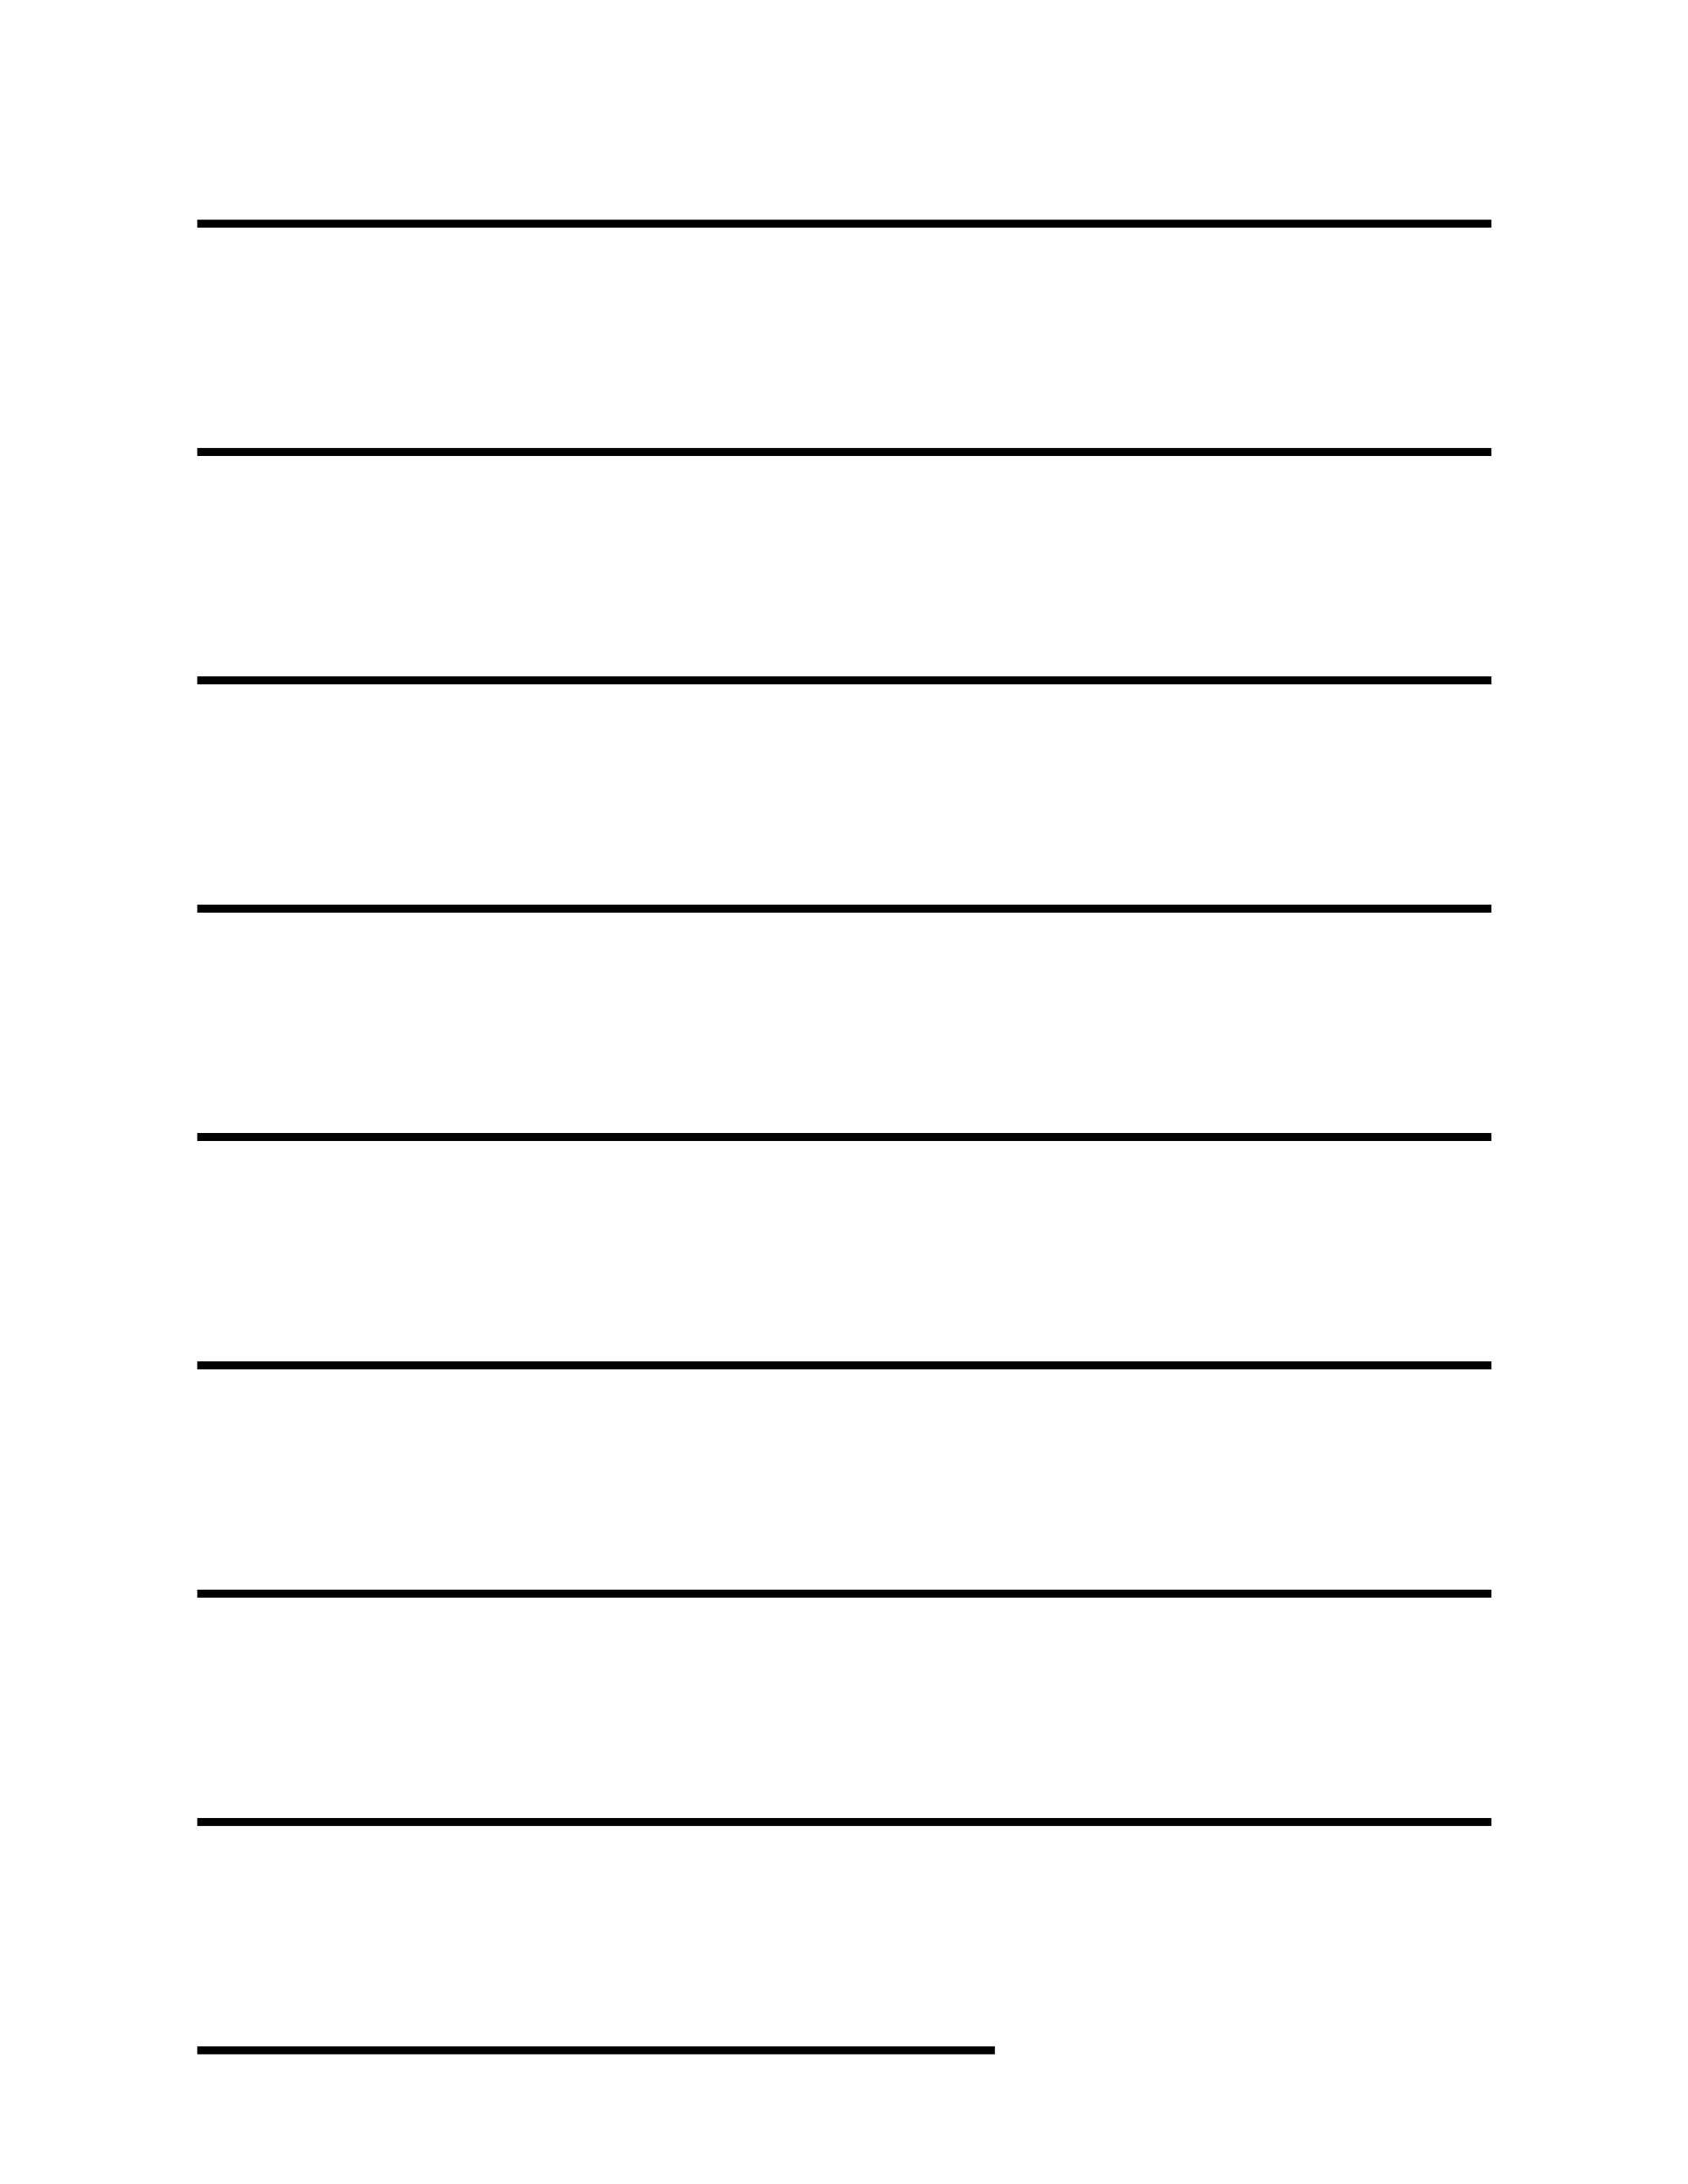 a-blank-lined-paper-with-red-lines-on-the-bottom-and-one-line-at-the-top